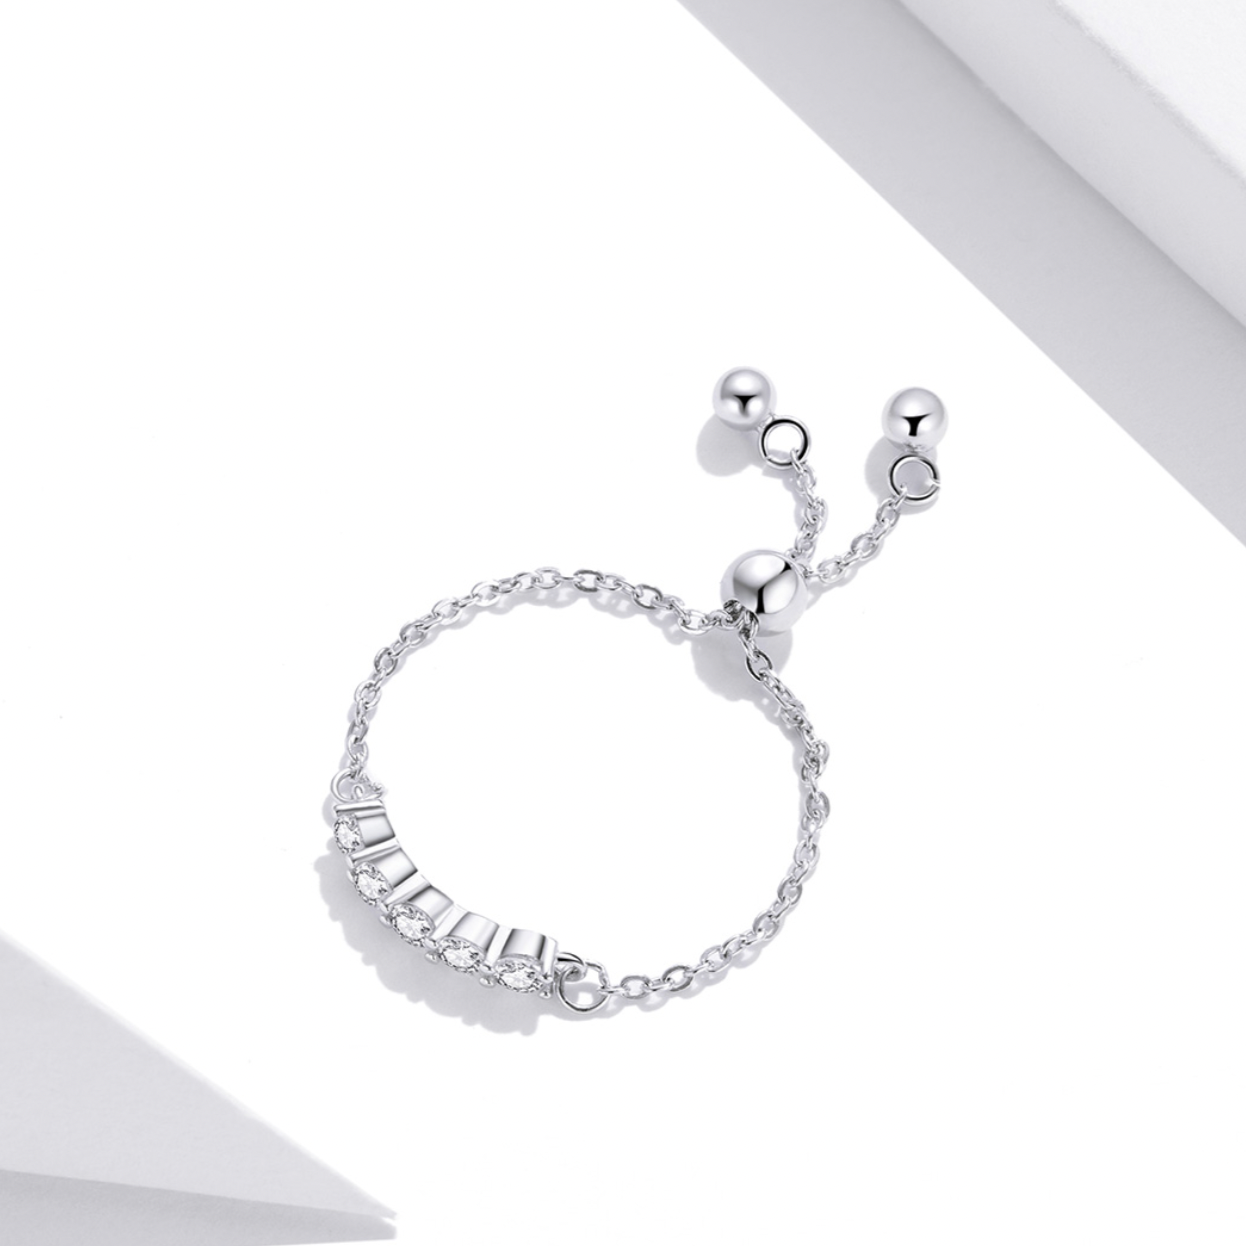 Adjustable 5 stone Chain Ring, Sterling Silver